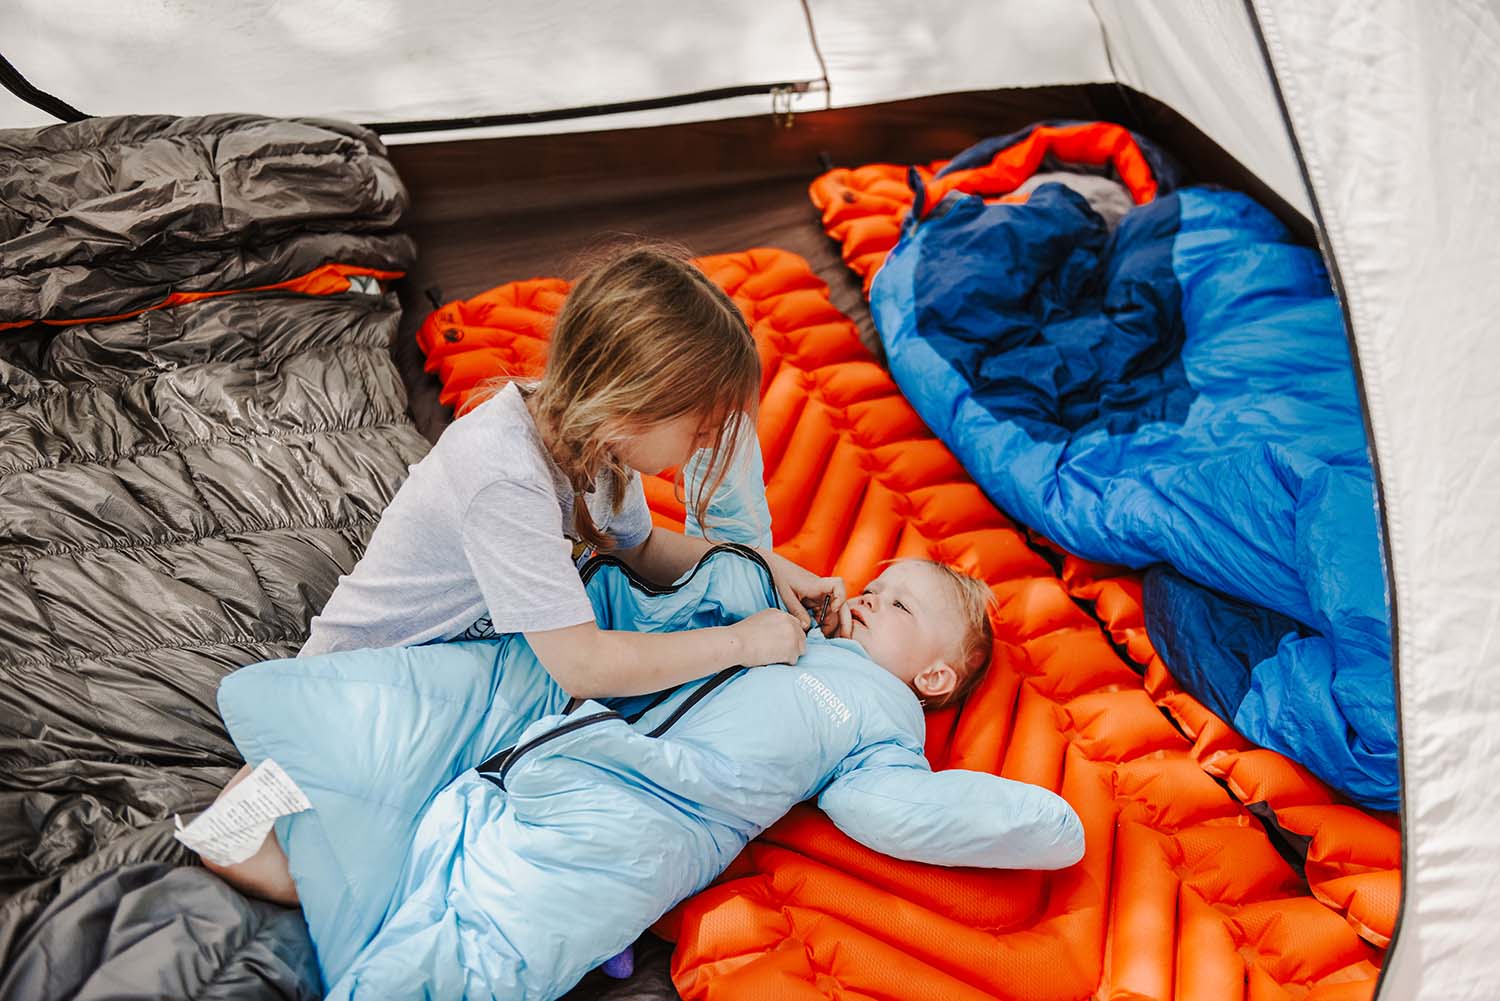 baby and young child in tent wtih sleeping bags